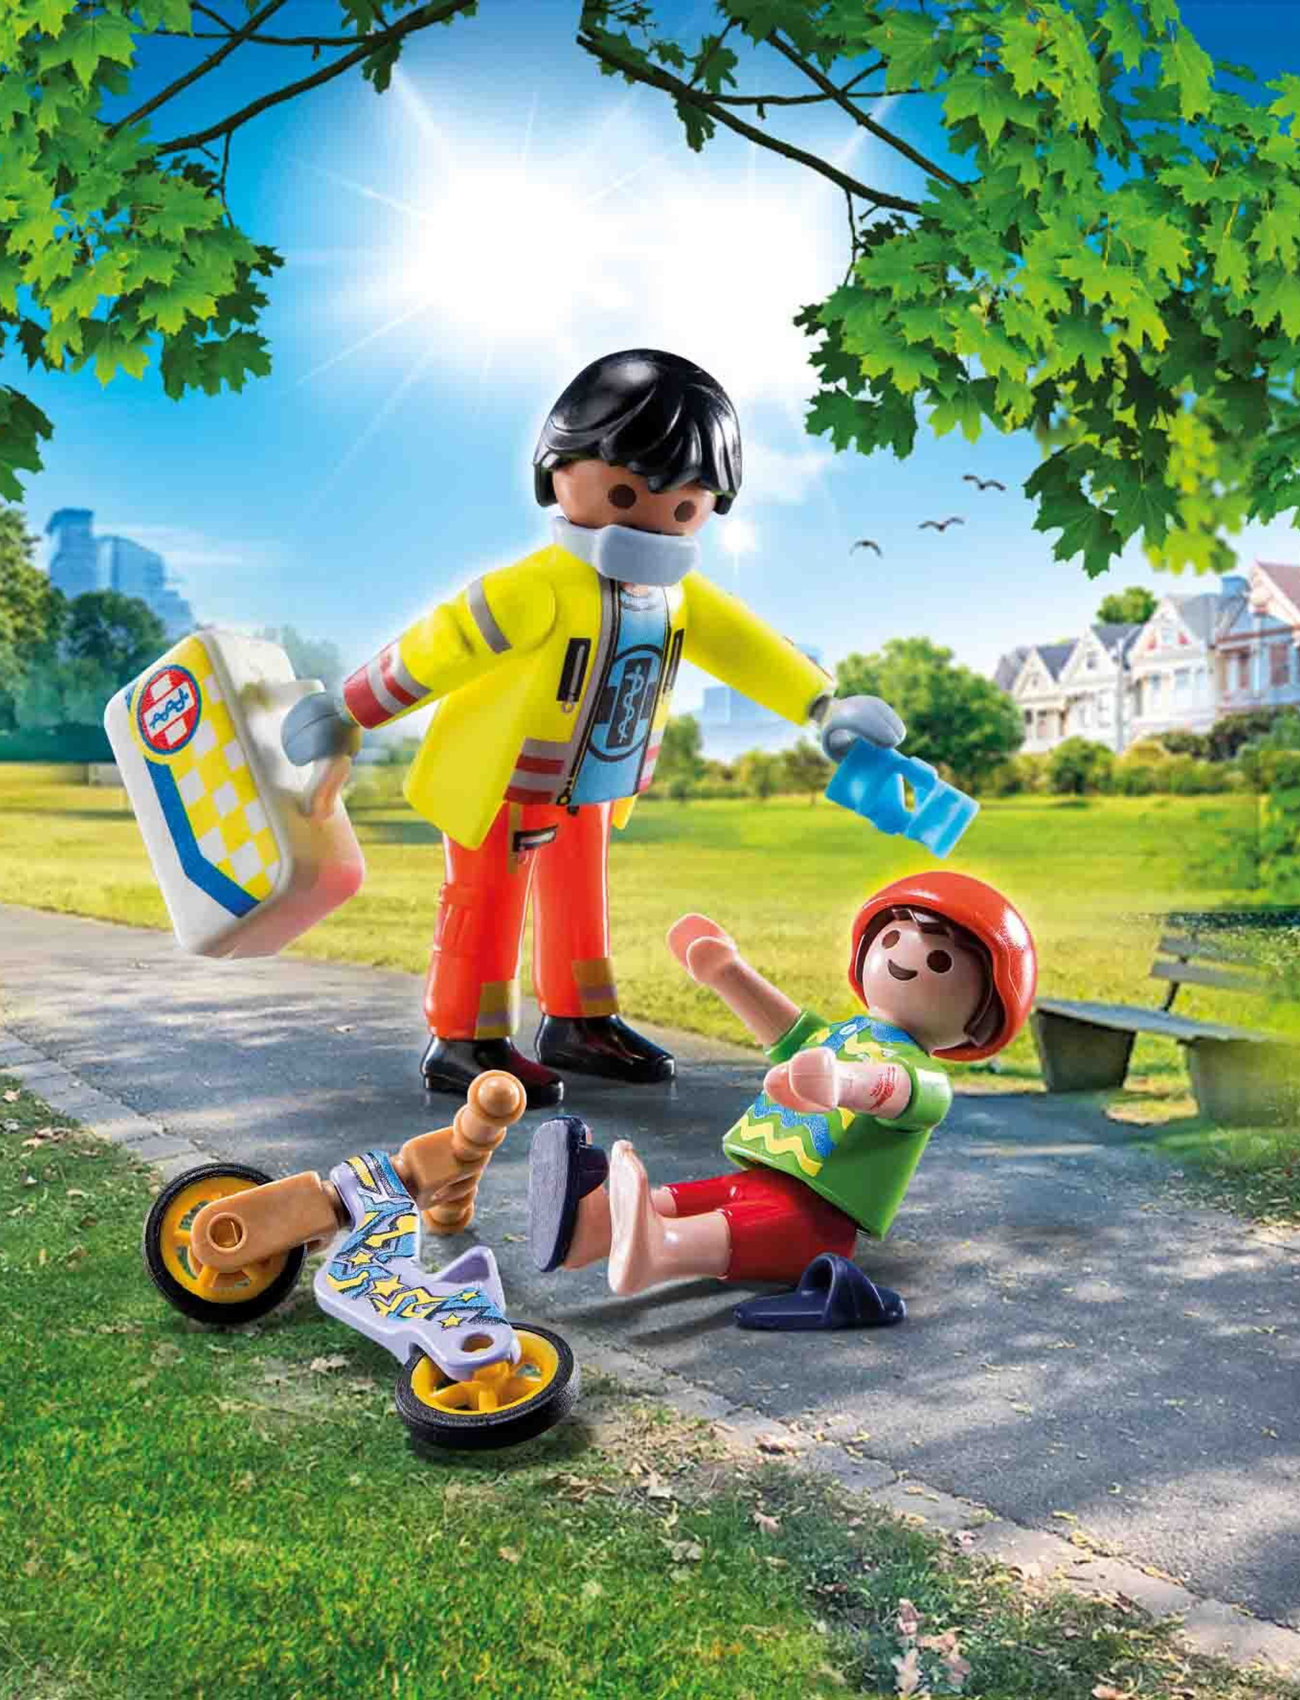 PLAYMOBIL - PLAYMOBIL City Life Paramedic with Patient - 71245 - playmobil city life - multicolored - 1